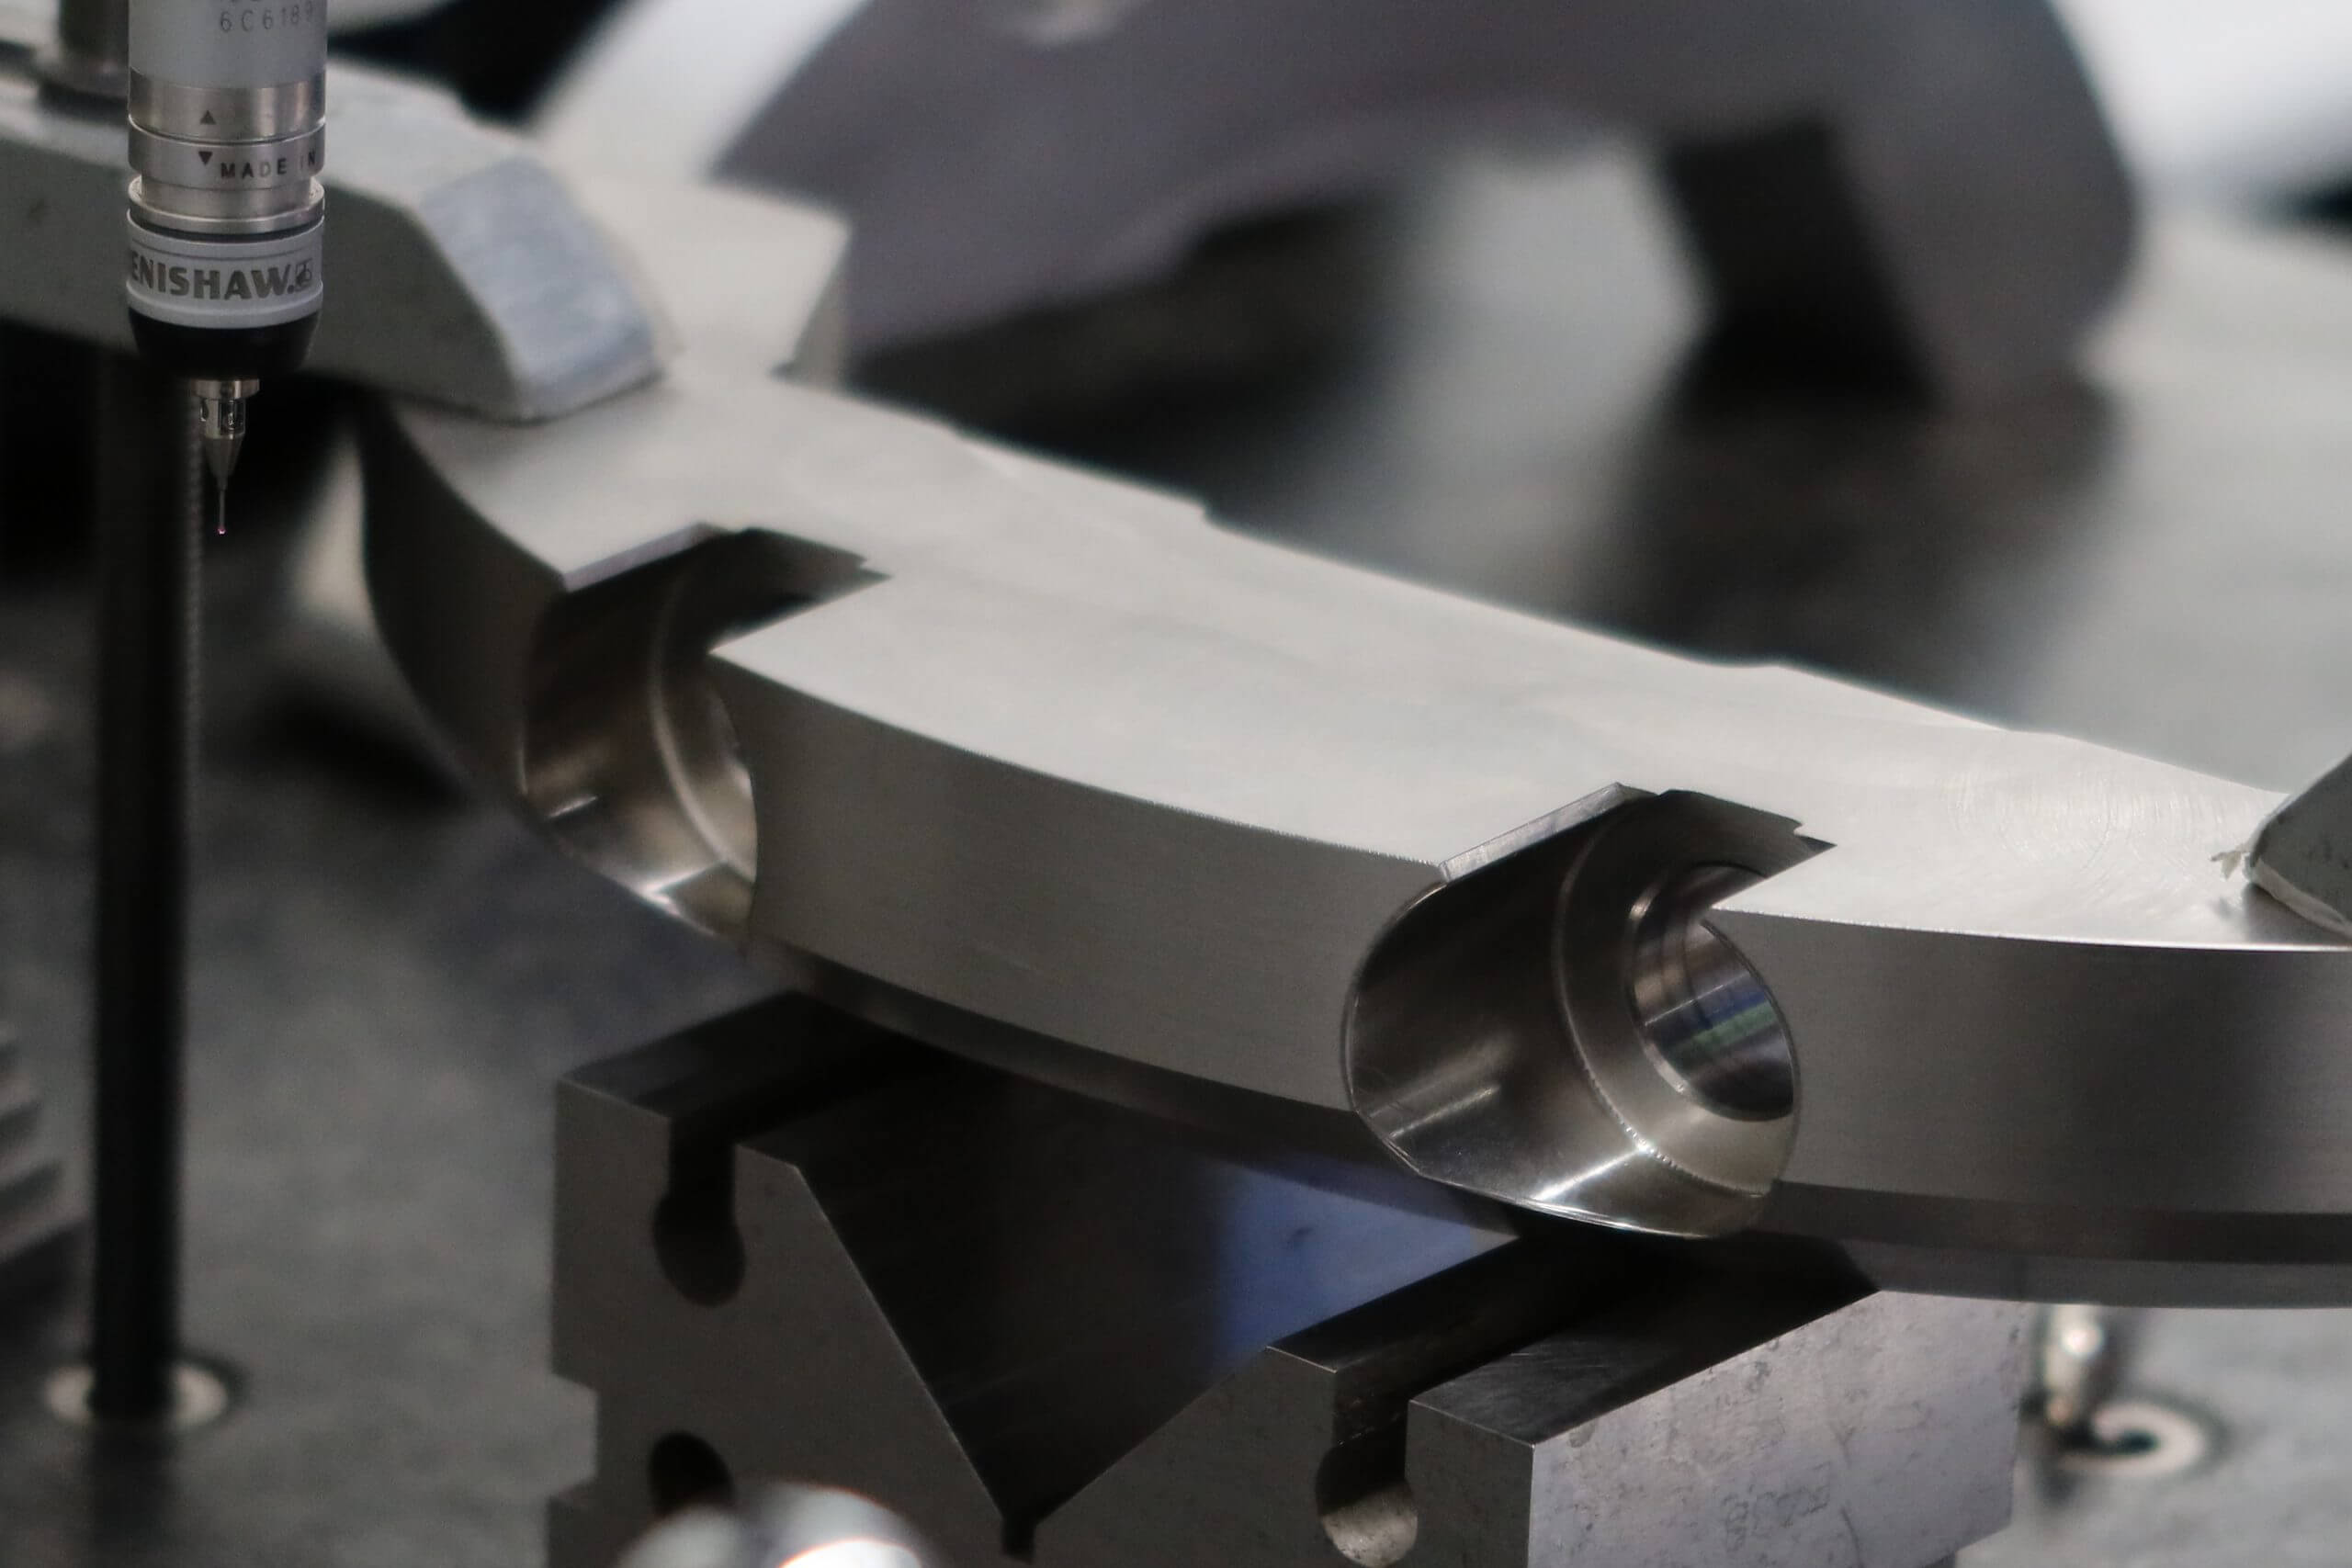 Machining Tungsten Guide: Can Tungsten Be Machined?